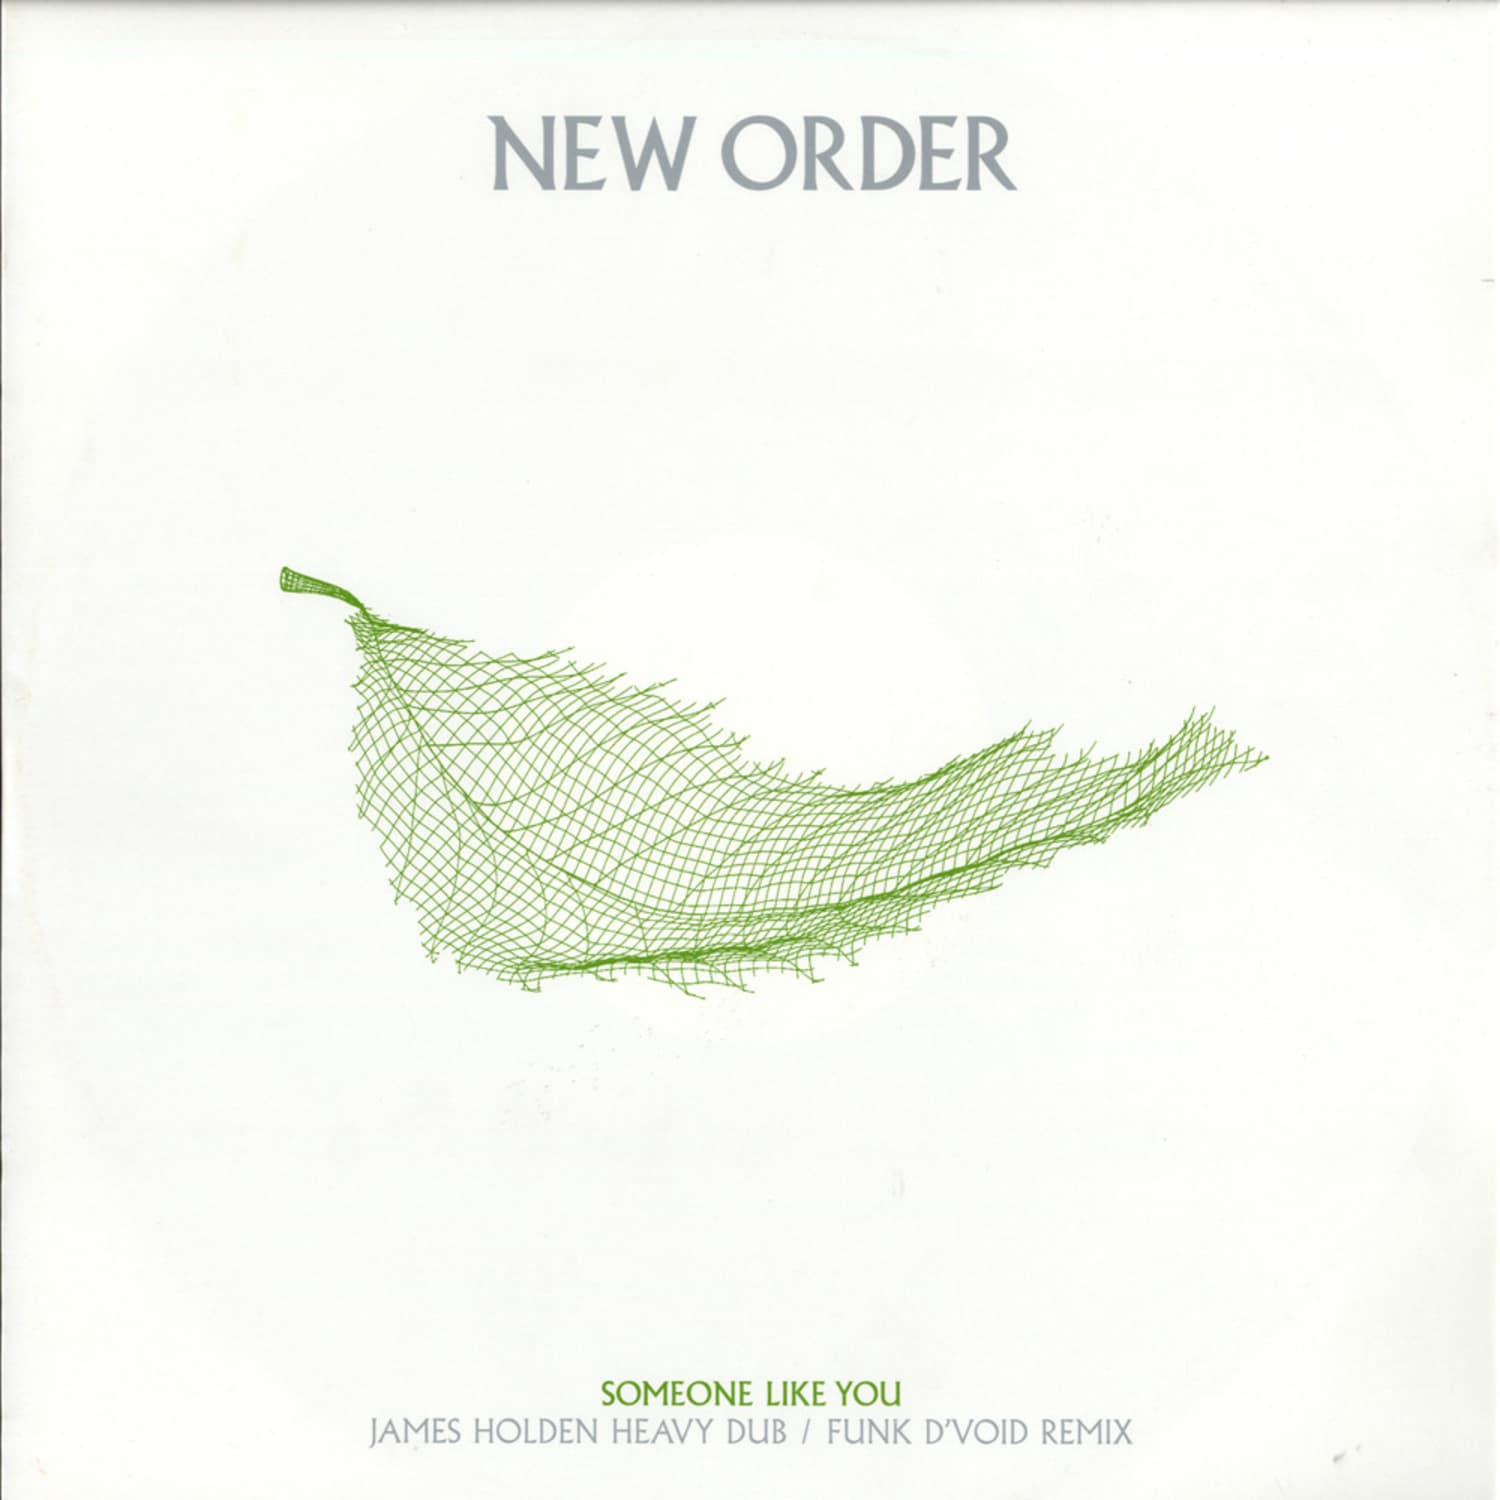 New Order - SOMEONE LIKE YOU 